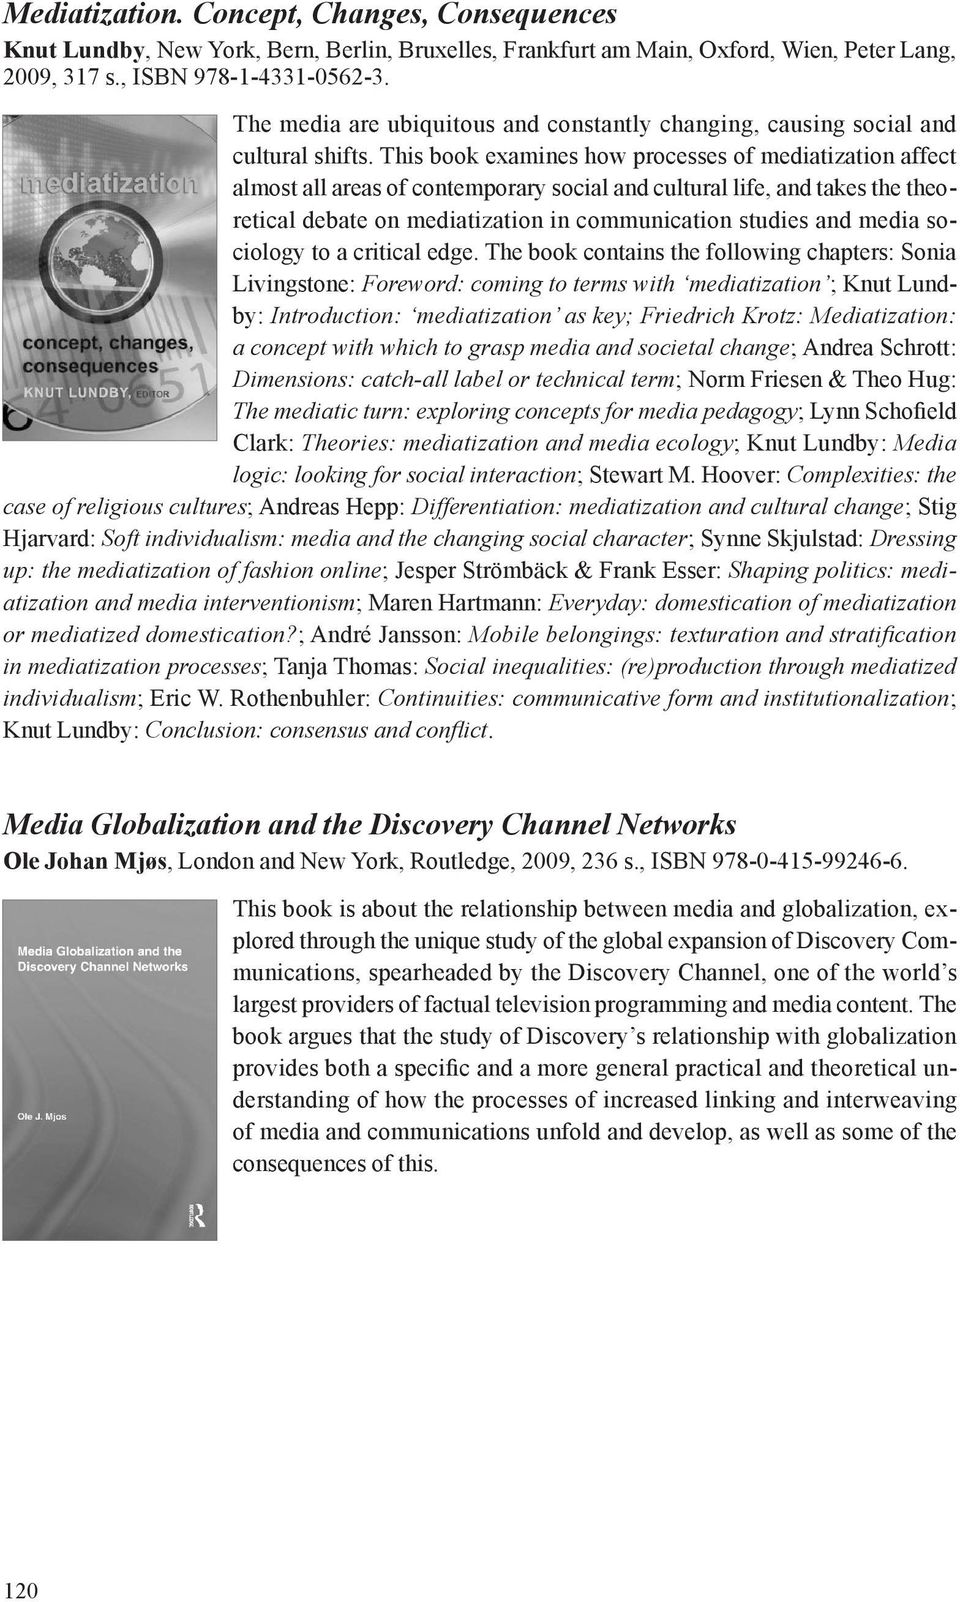 This book examines how processes of mediatization affect almost all areas of contemporary social and cultural life, and takes the theoretical debate on mediatization in communication studies and